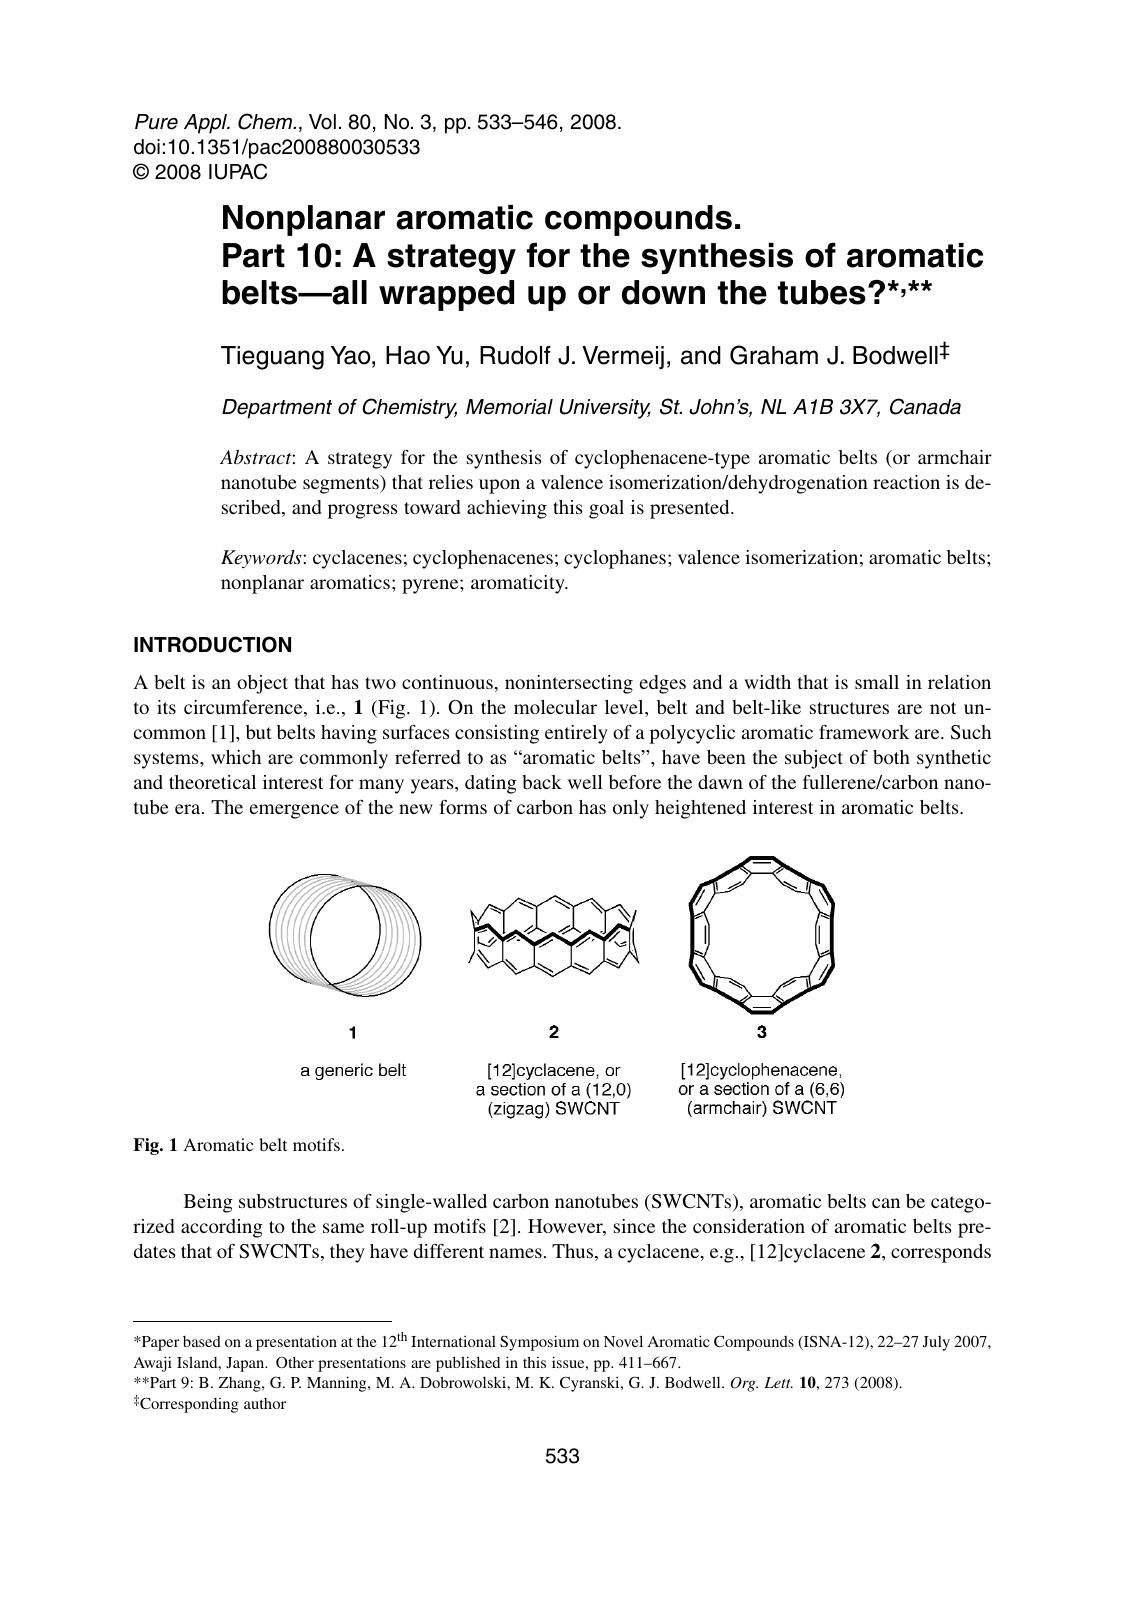 Nonplanar aromatic compounds. Part 10: A strategy for the synthesis of aromatic belts-all wrapped up or down the tubes? by Tieguang Yao Hao Yu Rudolf J. Vermeij & Graham J. Bodwell